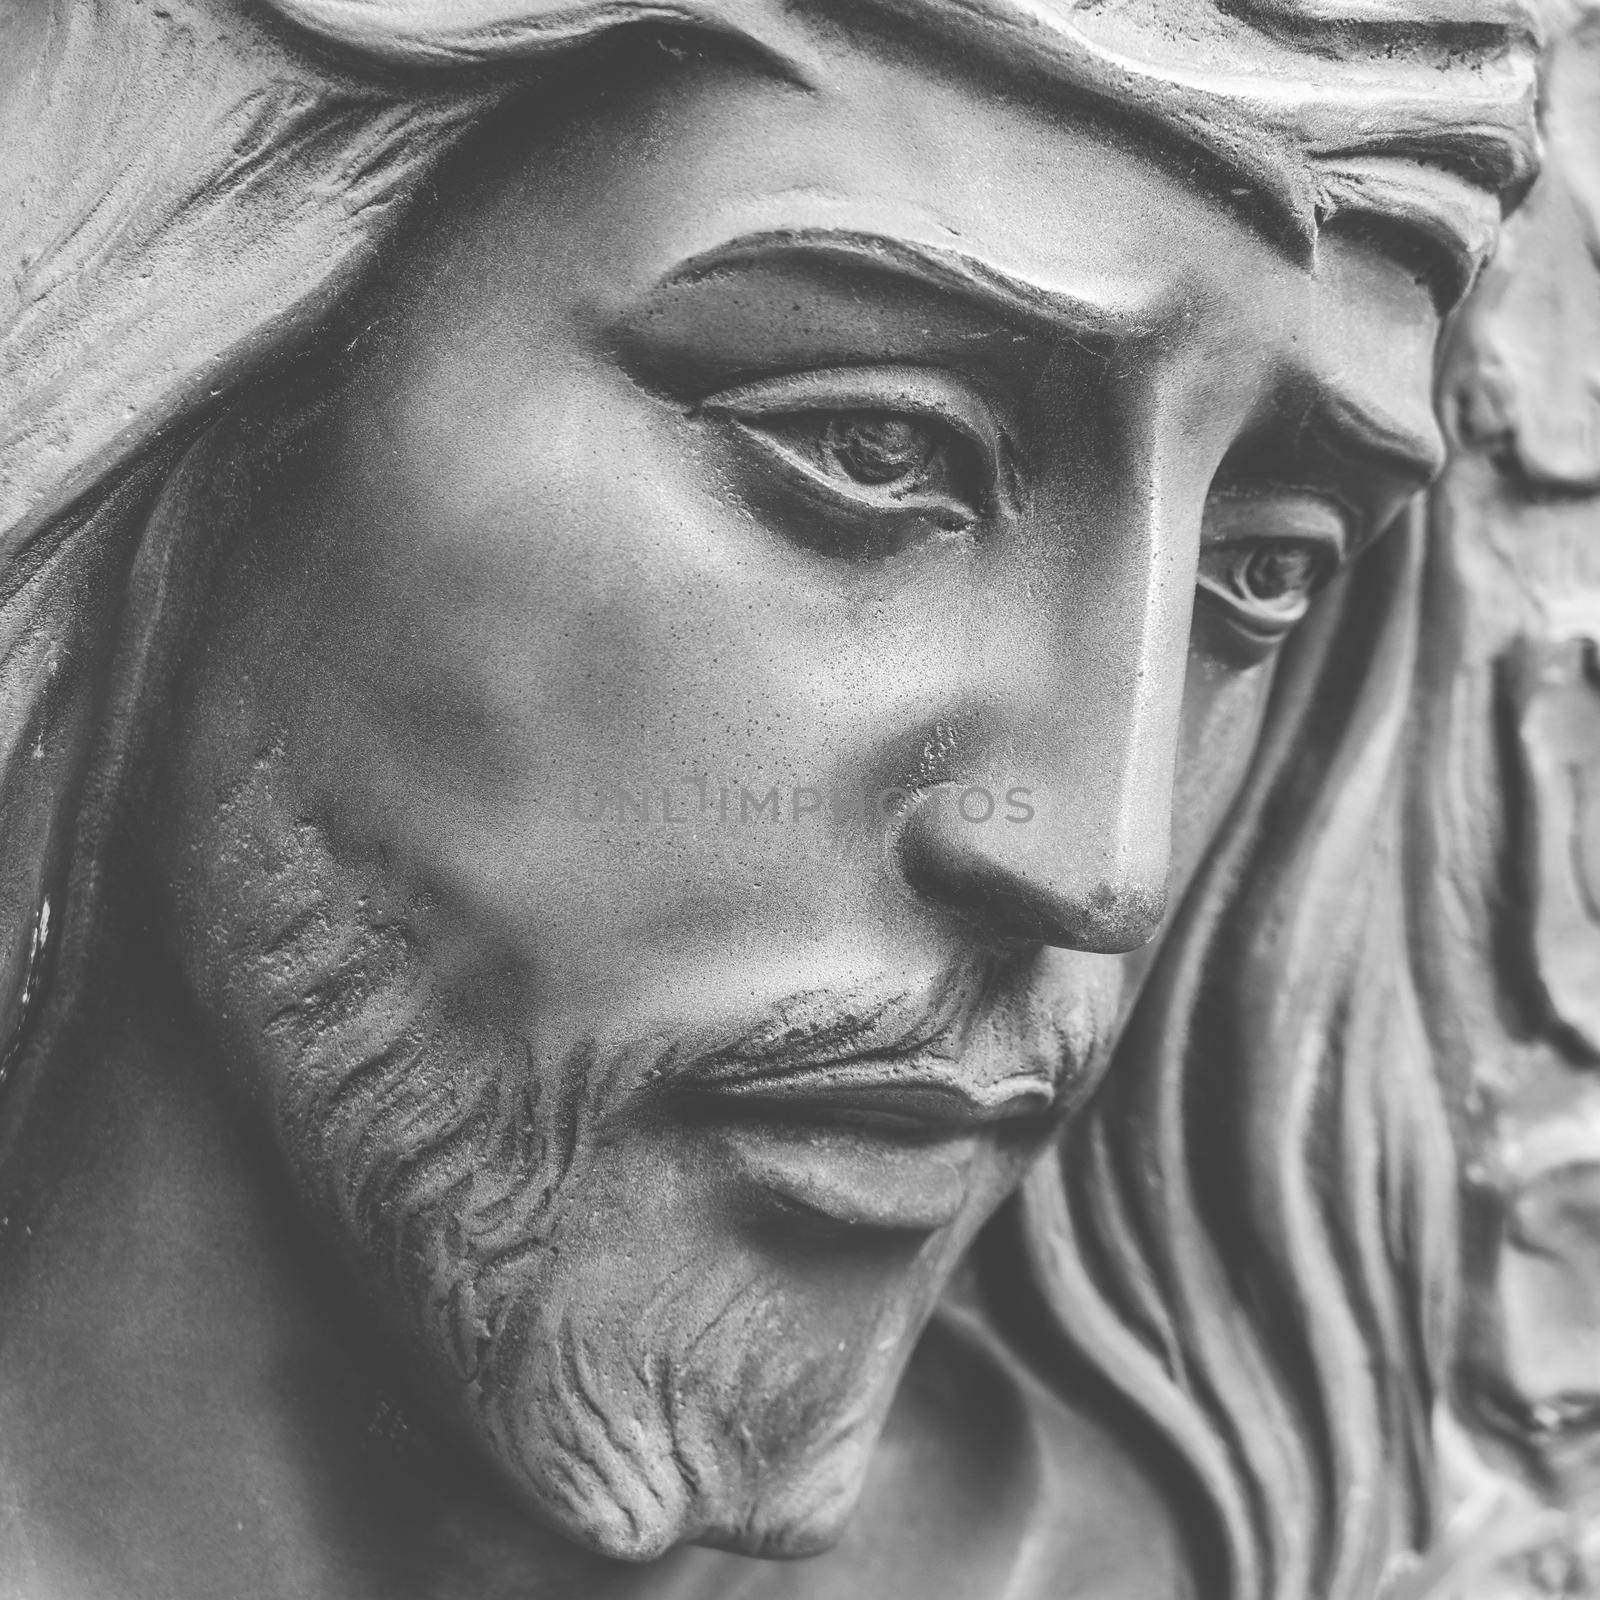 Statue of the face of jesus with a crown of thorns. Close-up. Ideal for concepts or events like Easter.